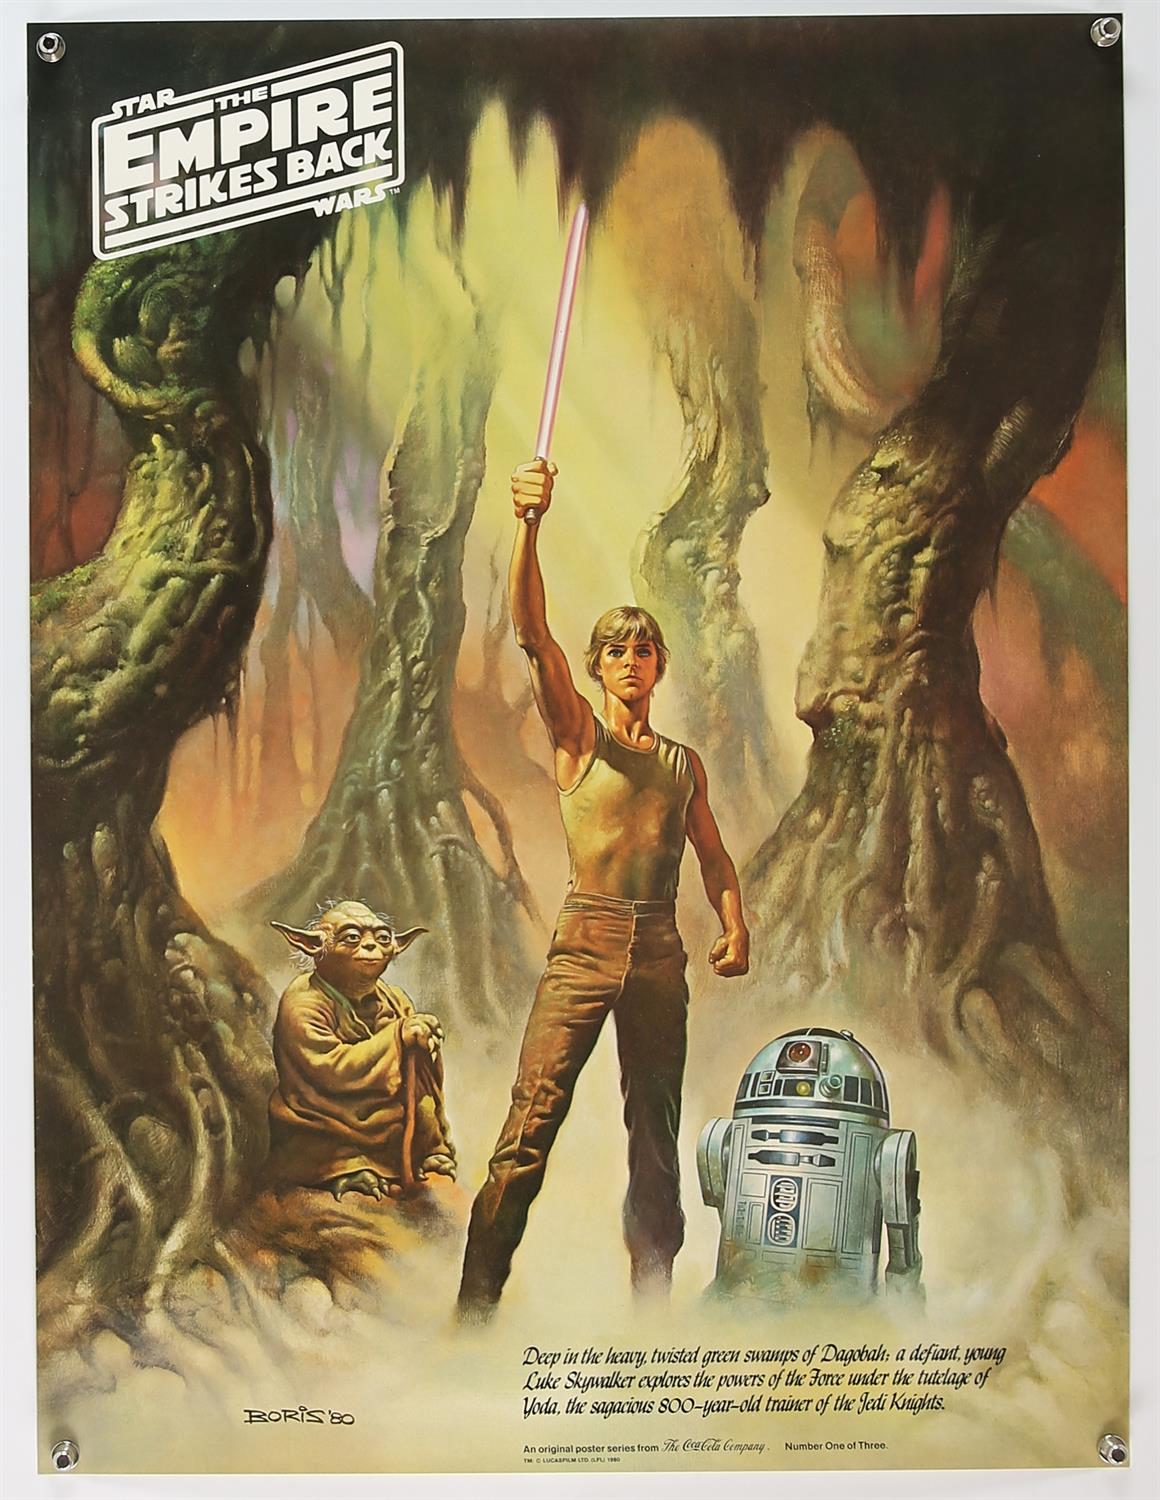 Star Wars The Empire Strikes Back (1980) Three Coca Cola posters with artwork by Boris Vallejo, - Image 3 of 3